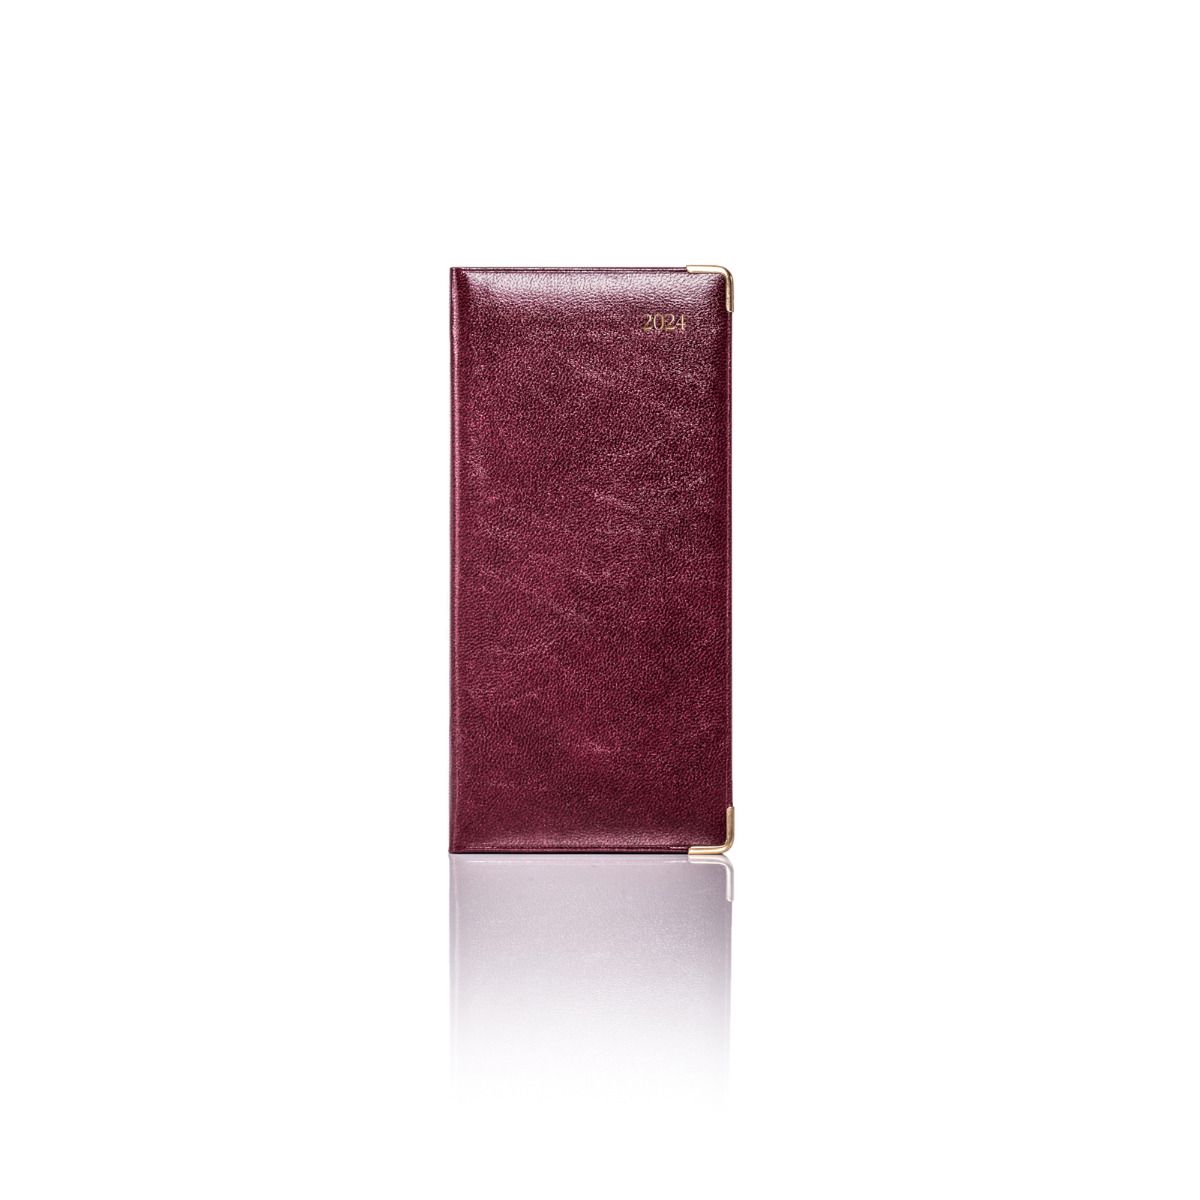 Colombia de Luxe Cream Pages Diary 2024 - Burgundy